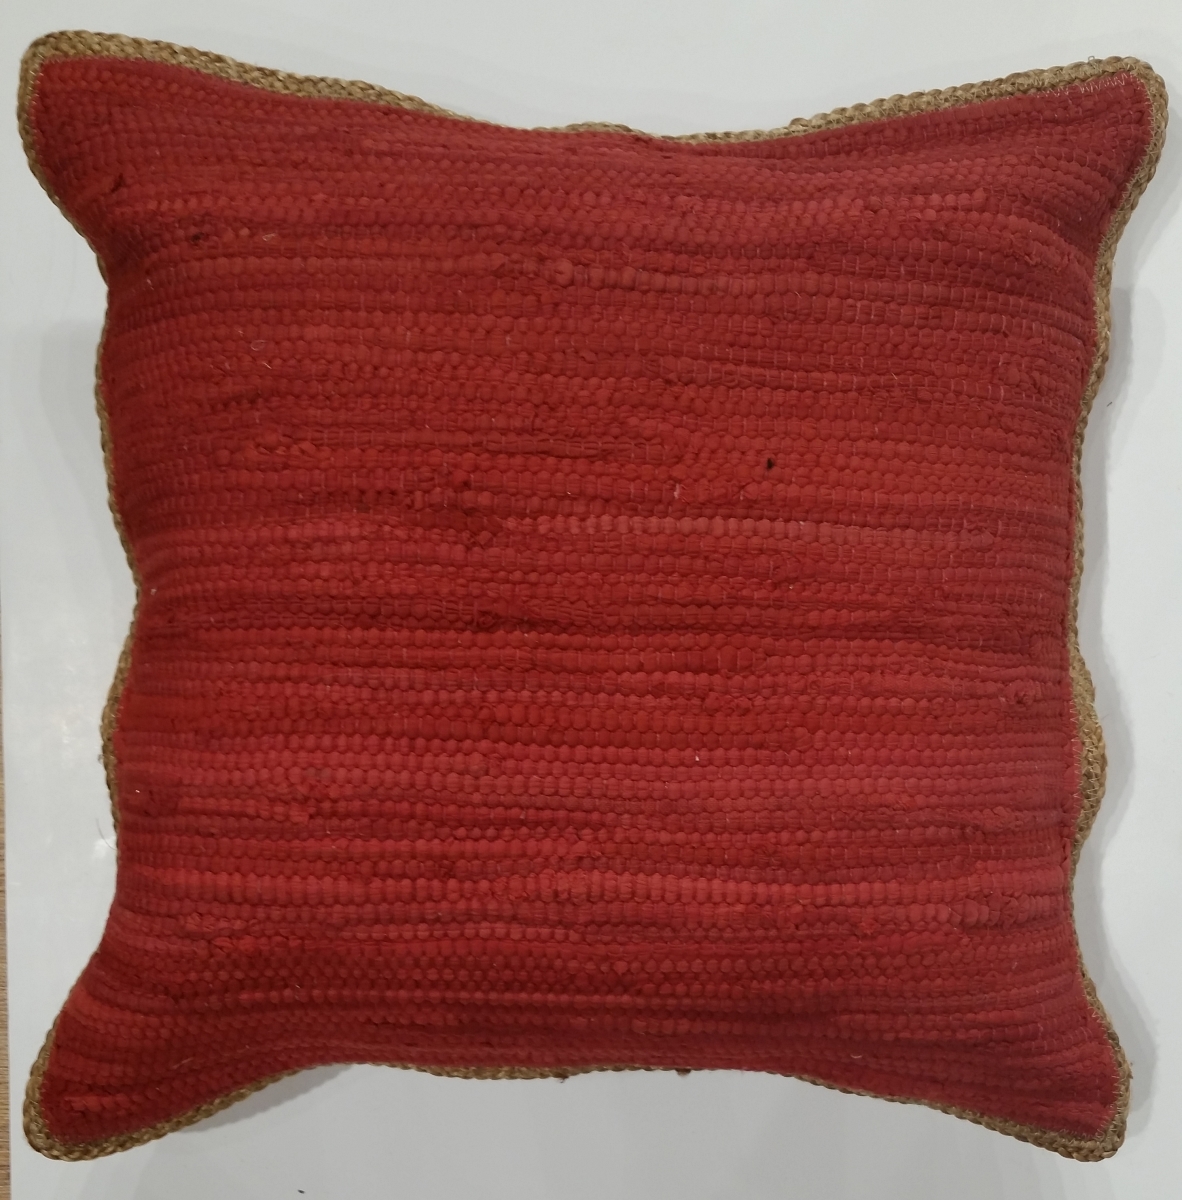 20 X 20 In. Square Pillow, Red